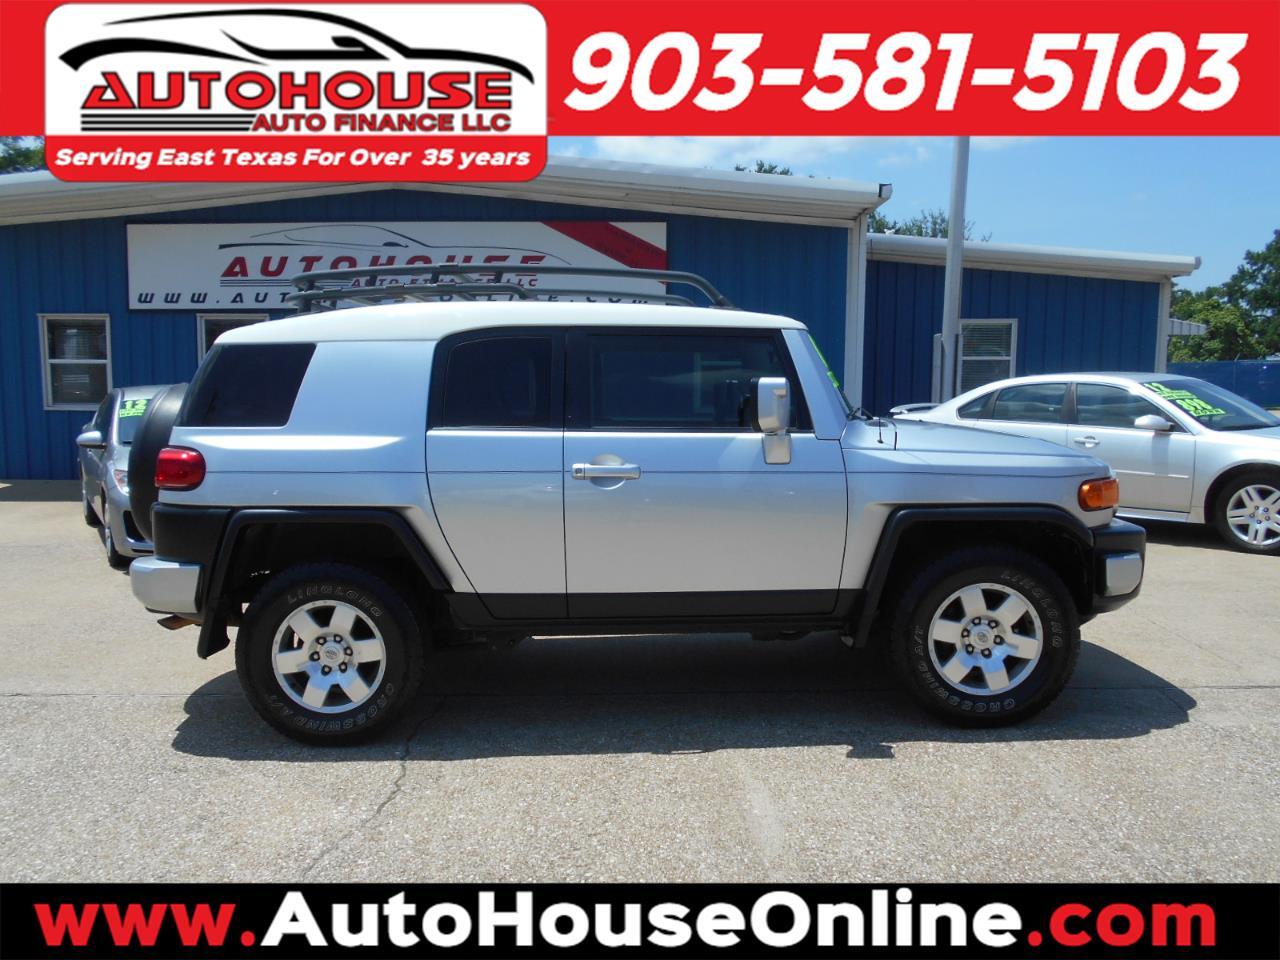 Used 2007 Toyota Fj Cruiser 4wd At For Sale In Tyler Tx 75703